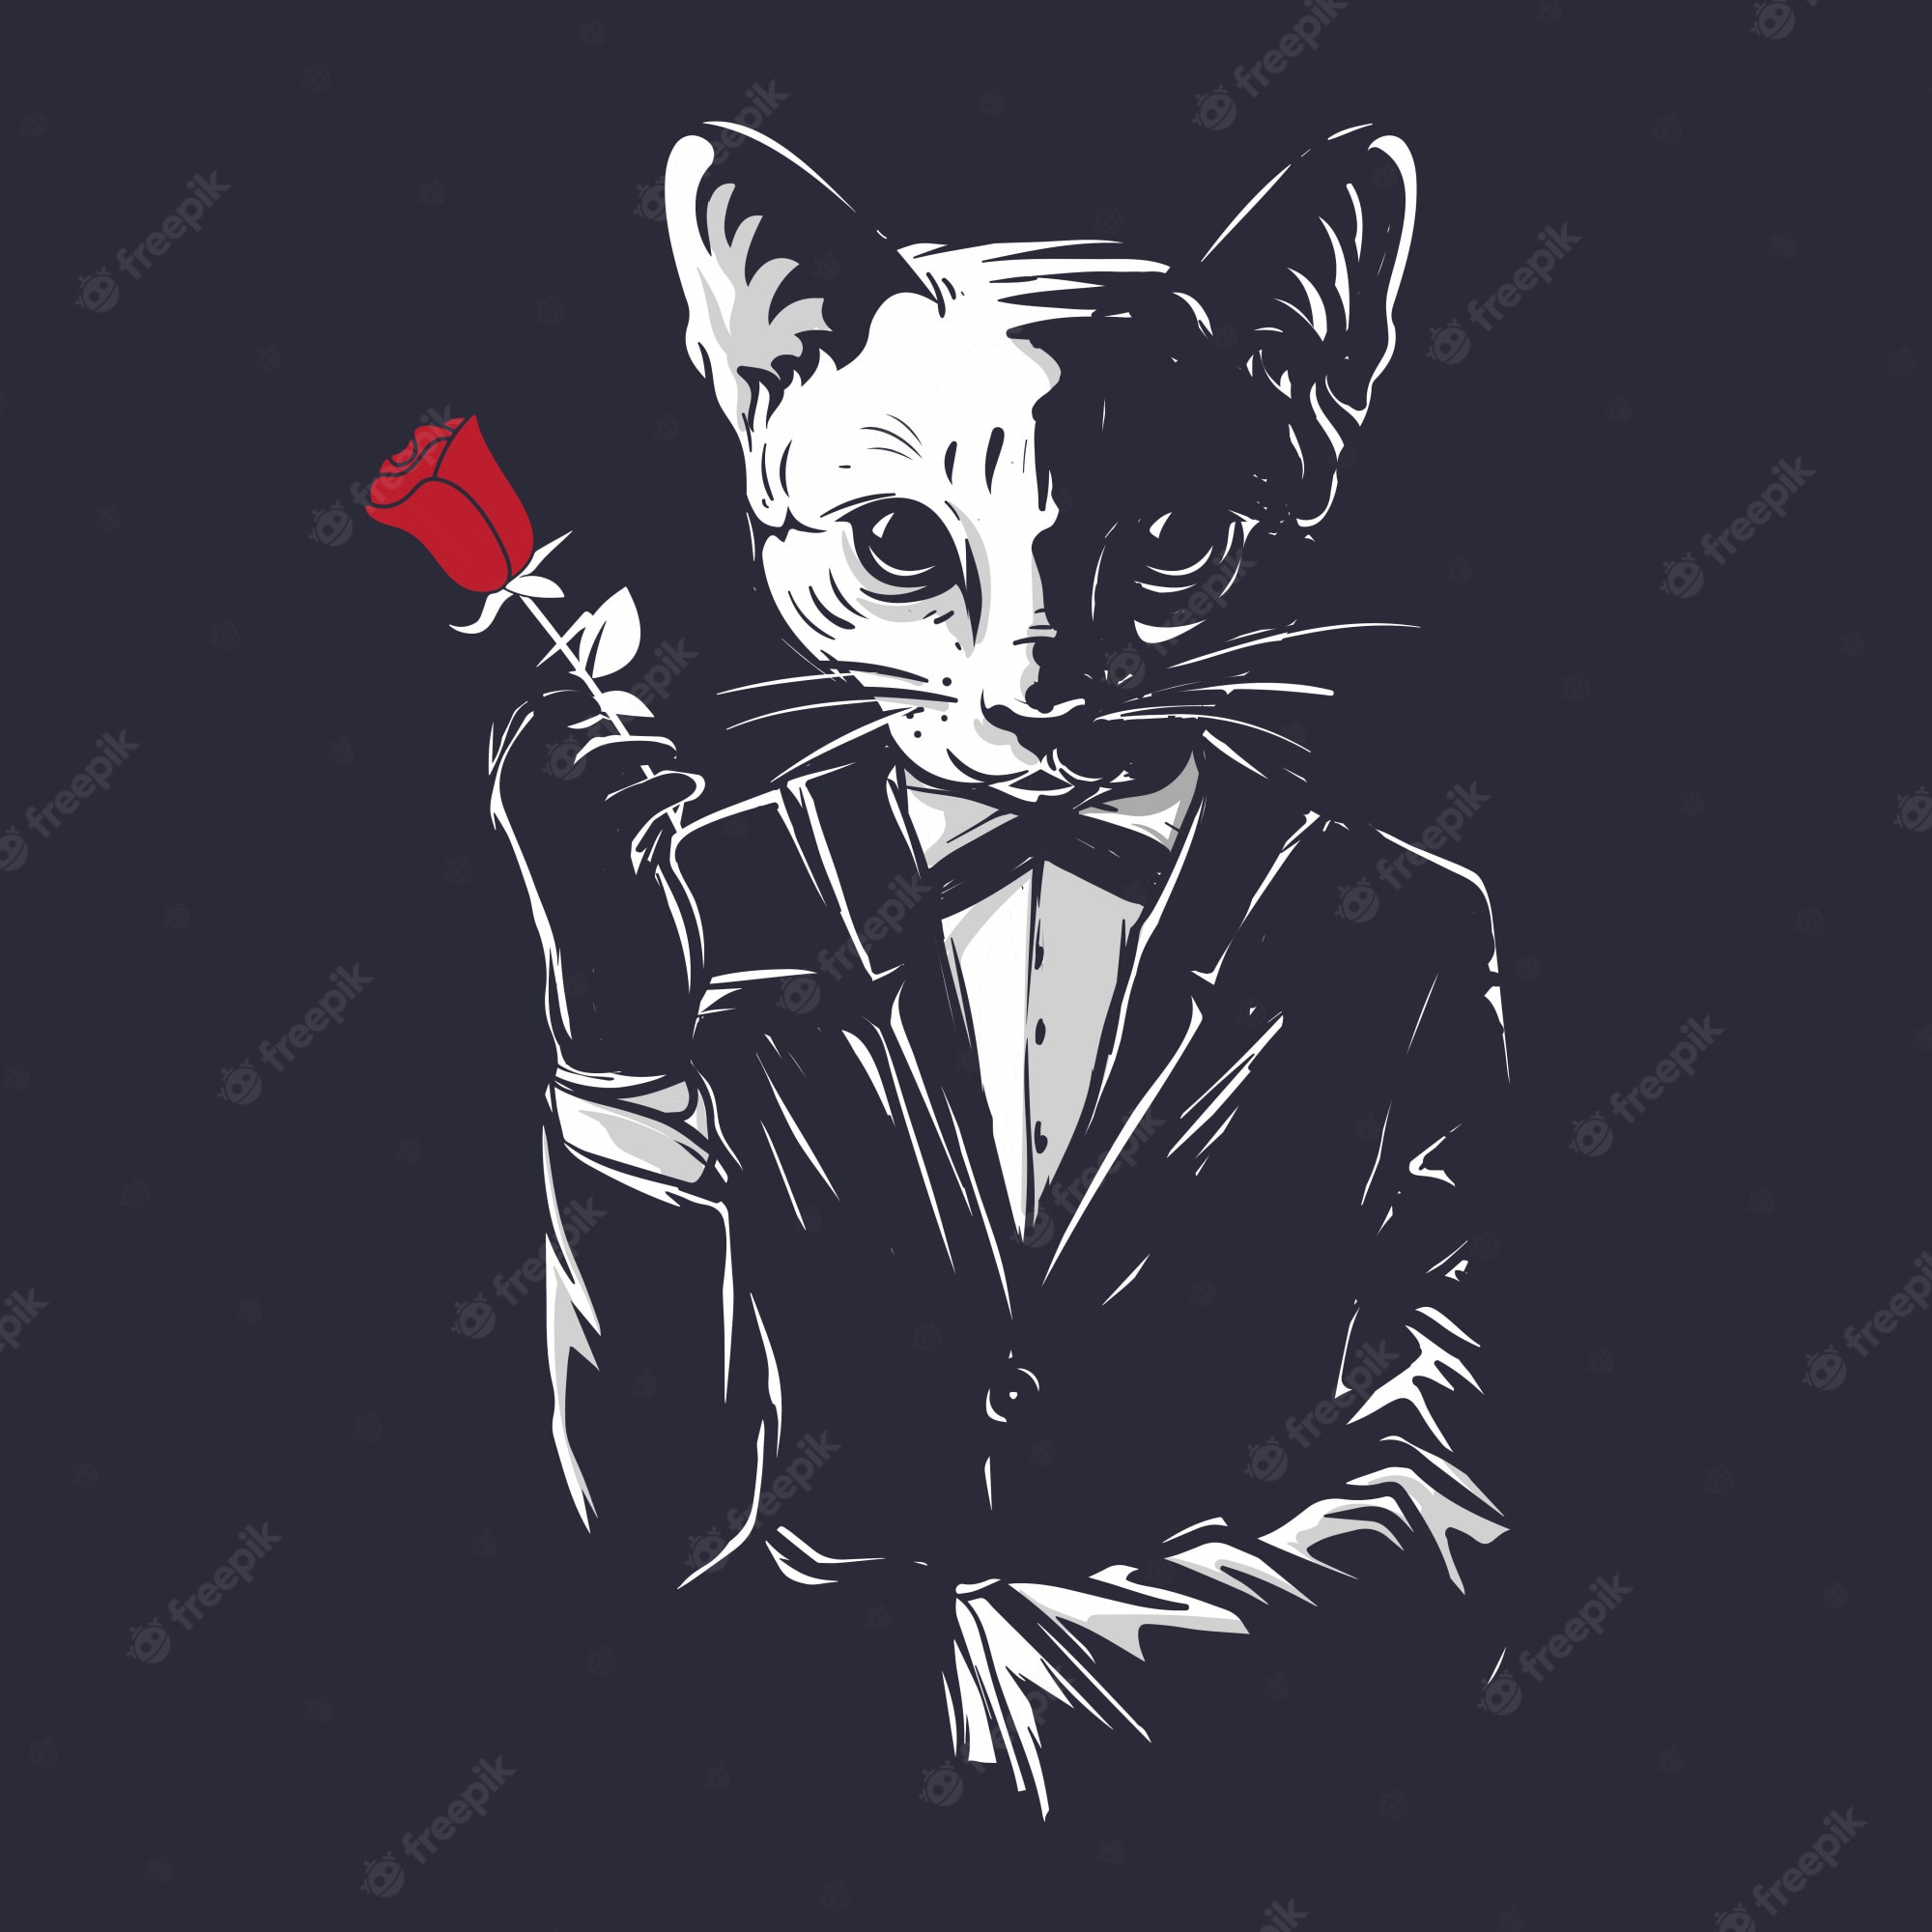 Thug Cat Wallpapers